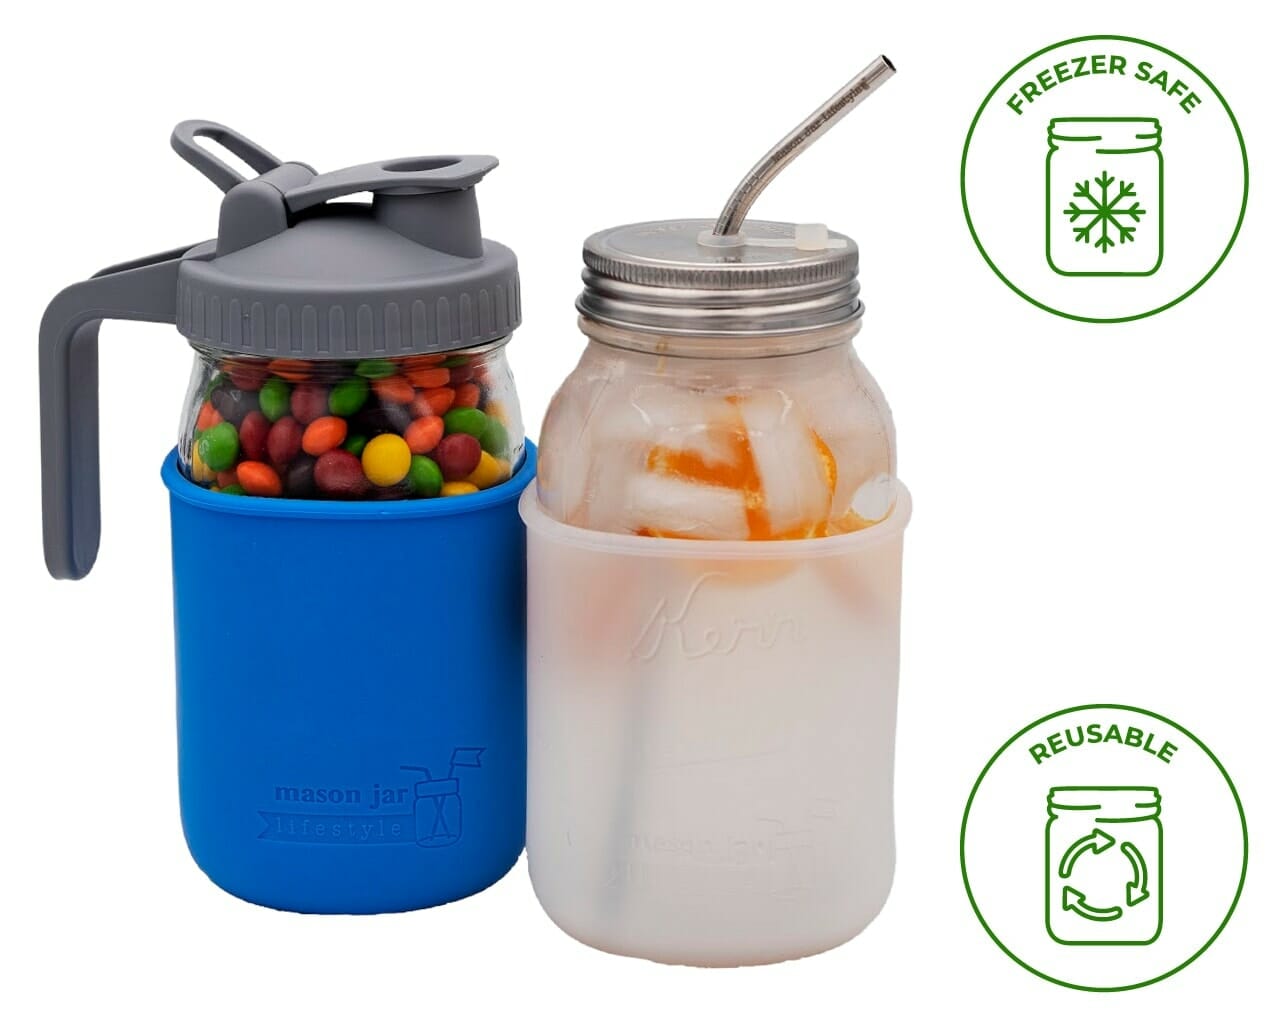 Quart 32 oz Ball and Kerr regular and wide mouth Mason jars with silicone sleeve / jacket which are freezer safe and reusable.